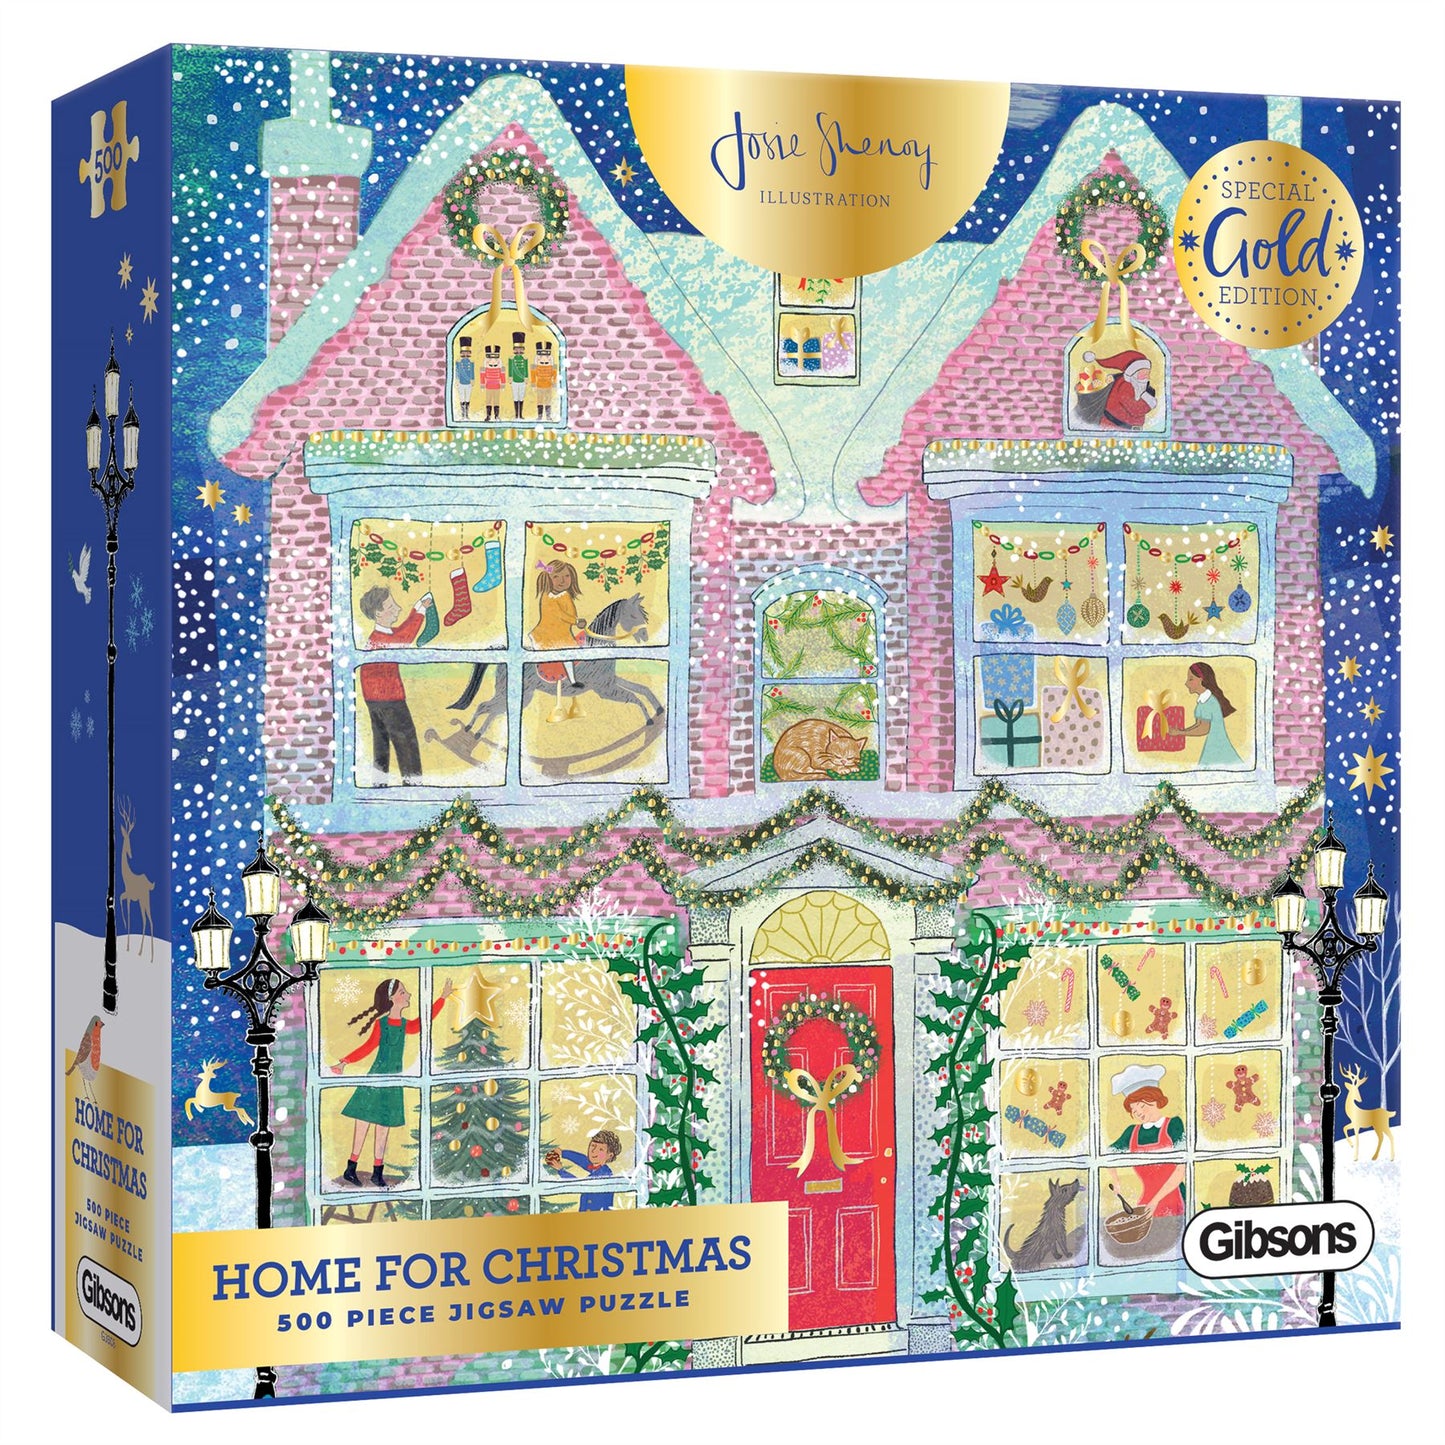 Home for Christmas 500 Piece Jigsaw Puzzle box